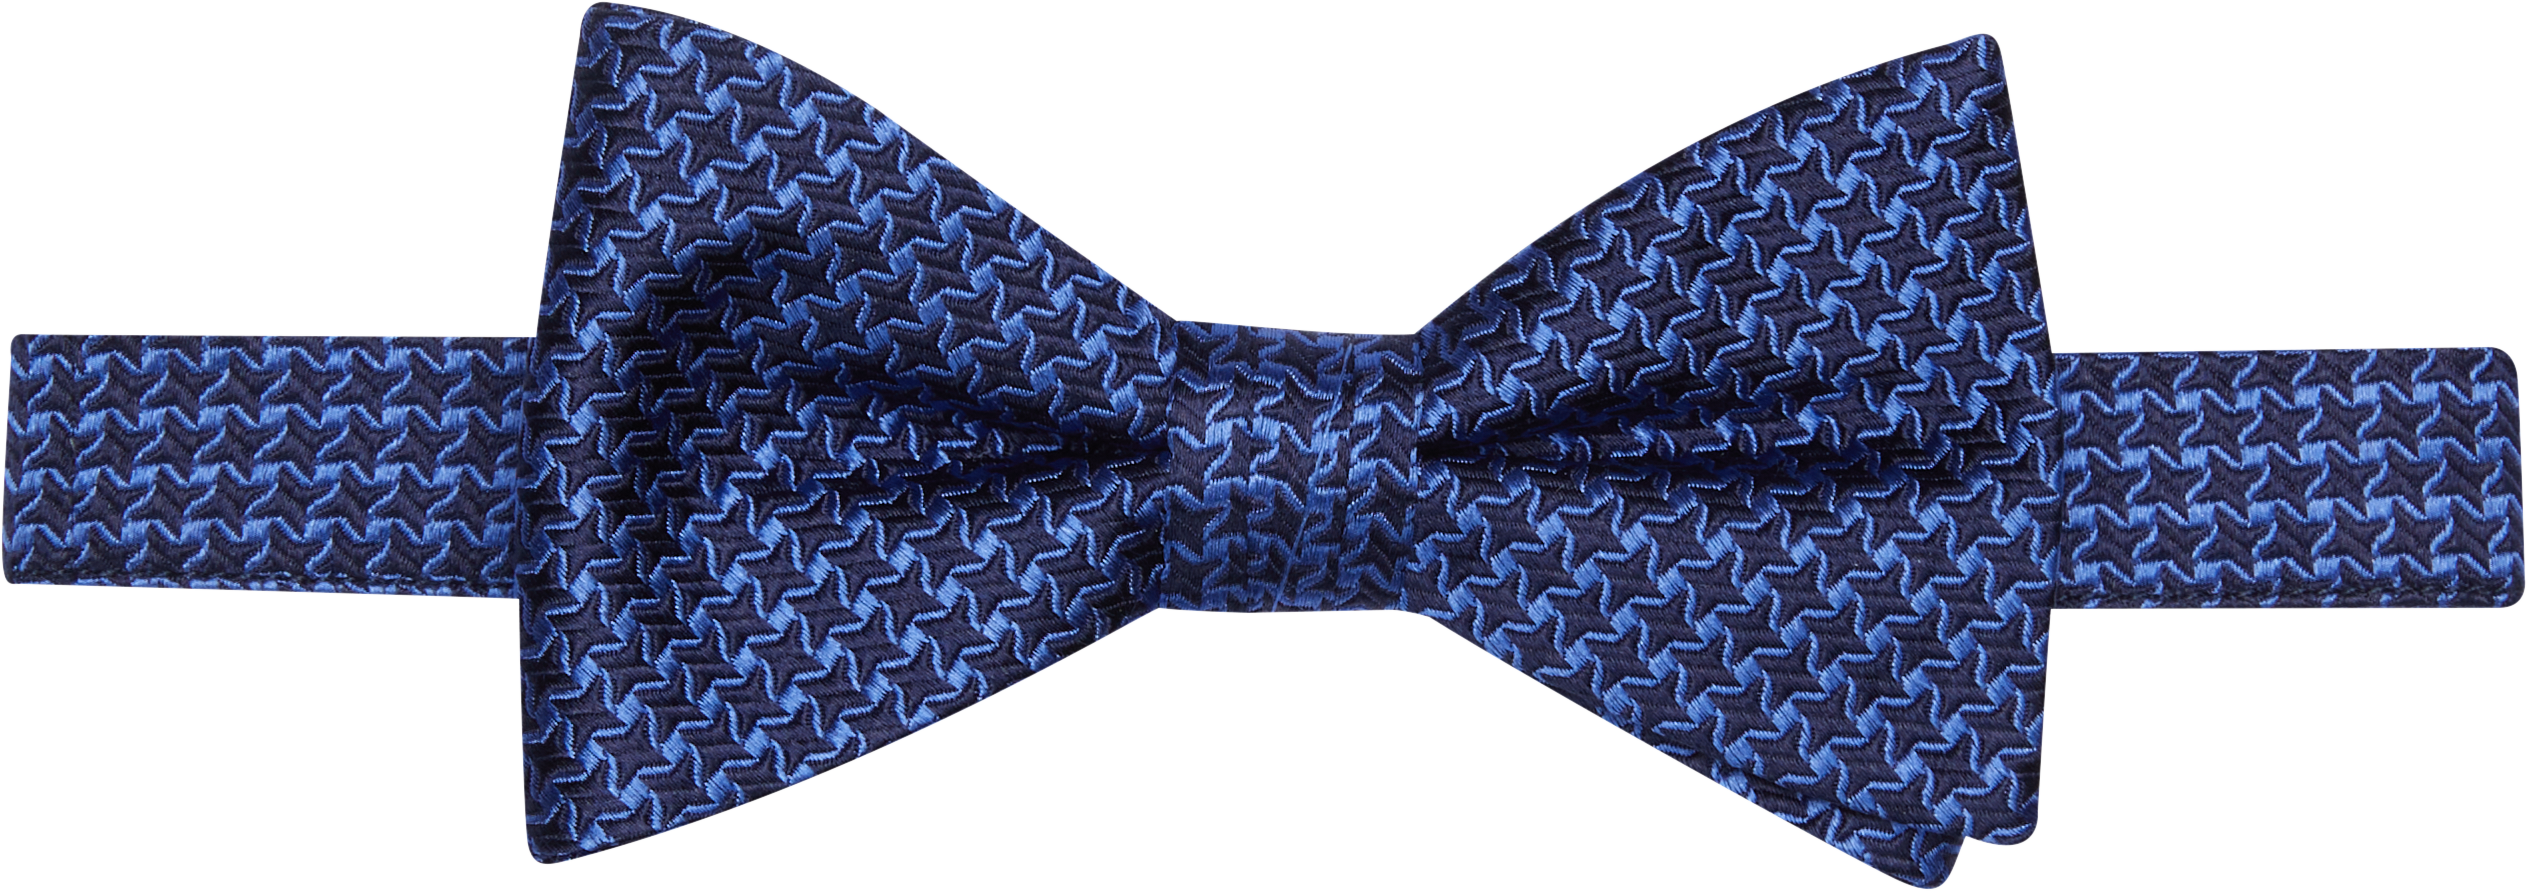 Houndstooth Pre-Tied Bow Tie